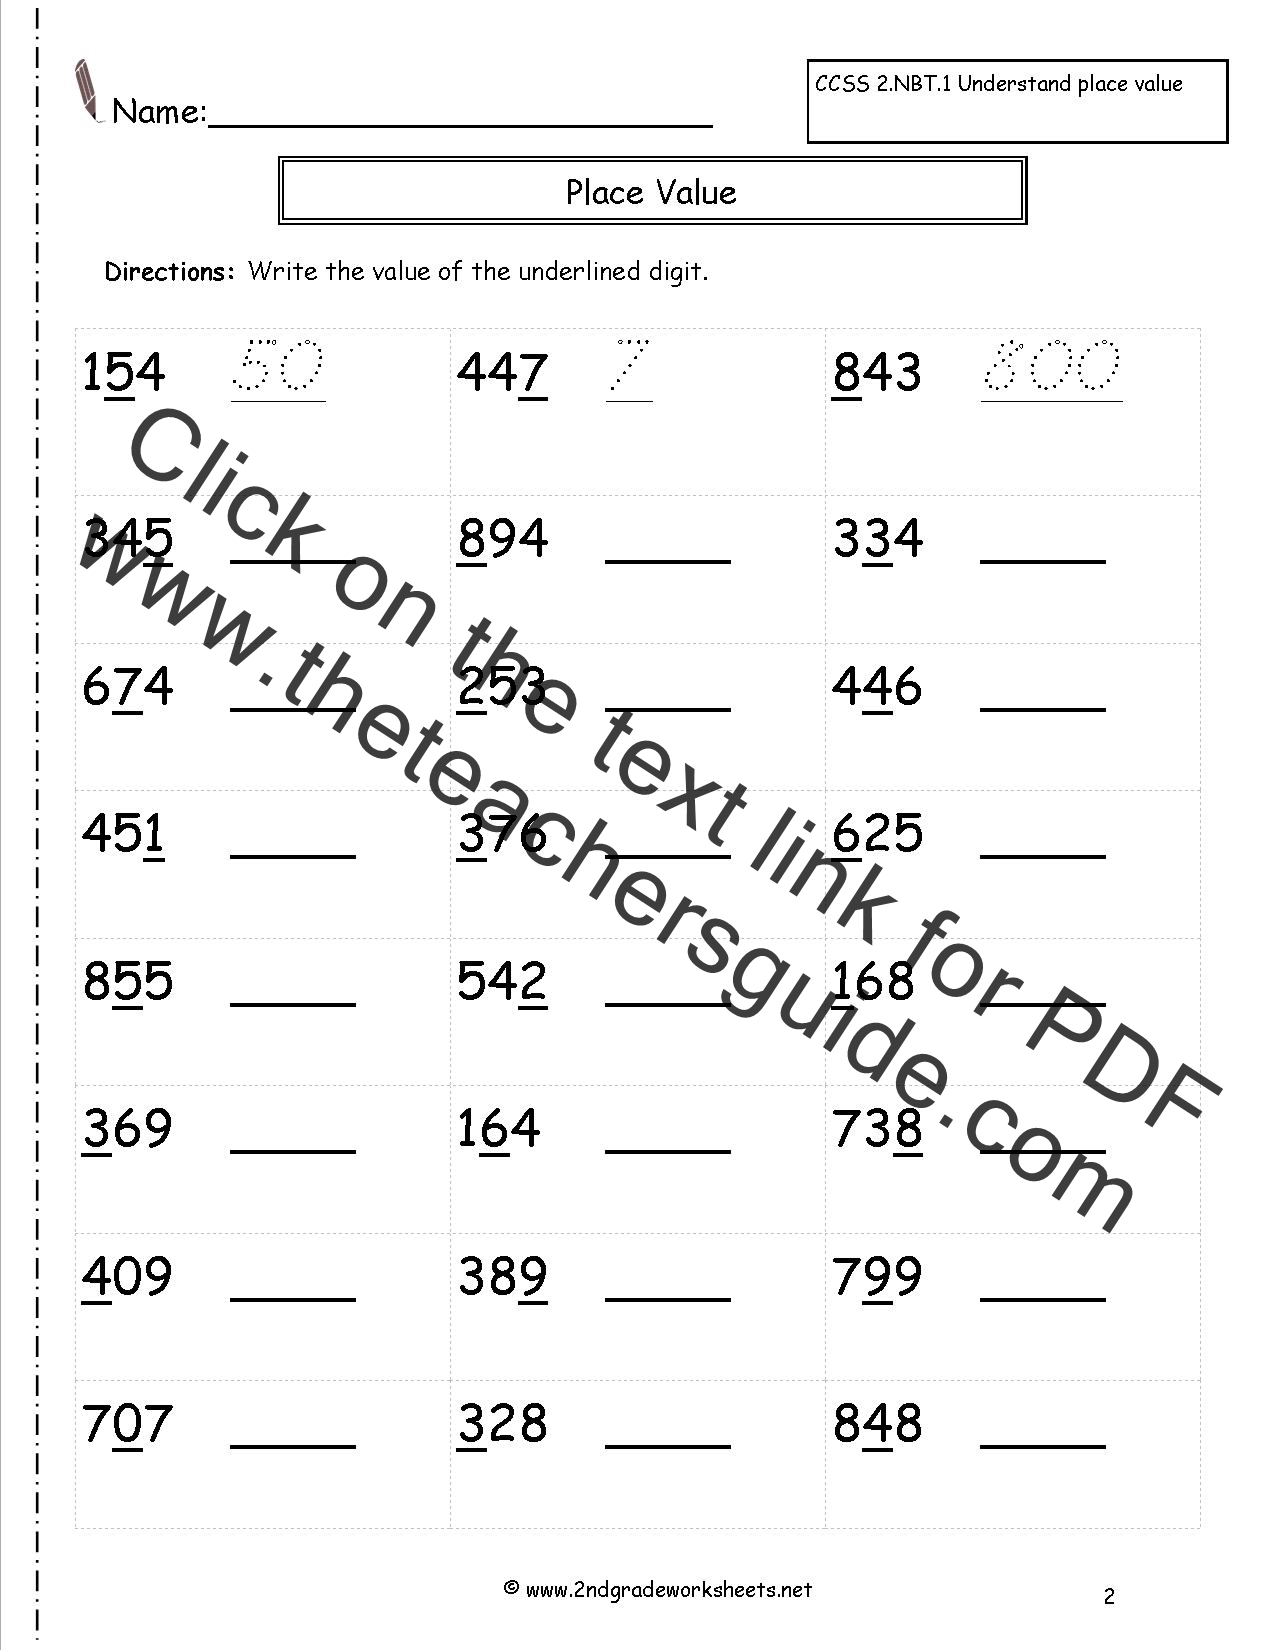 grade 2 place value and rounding worksheets free printable k5 learning